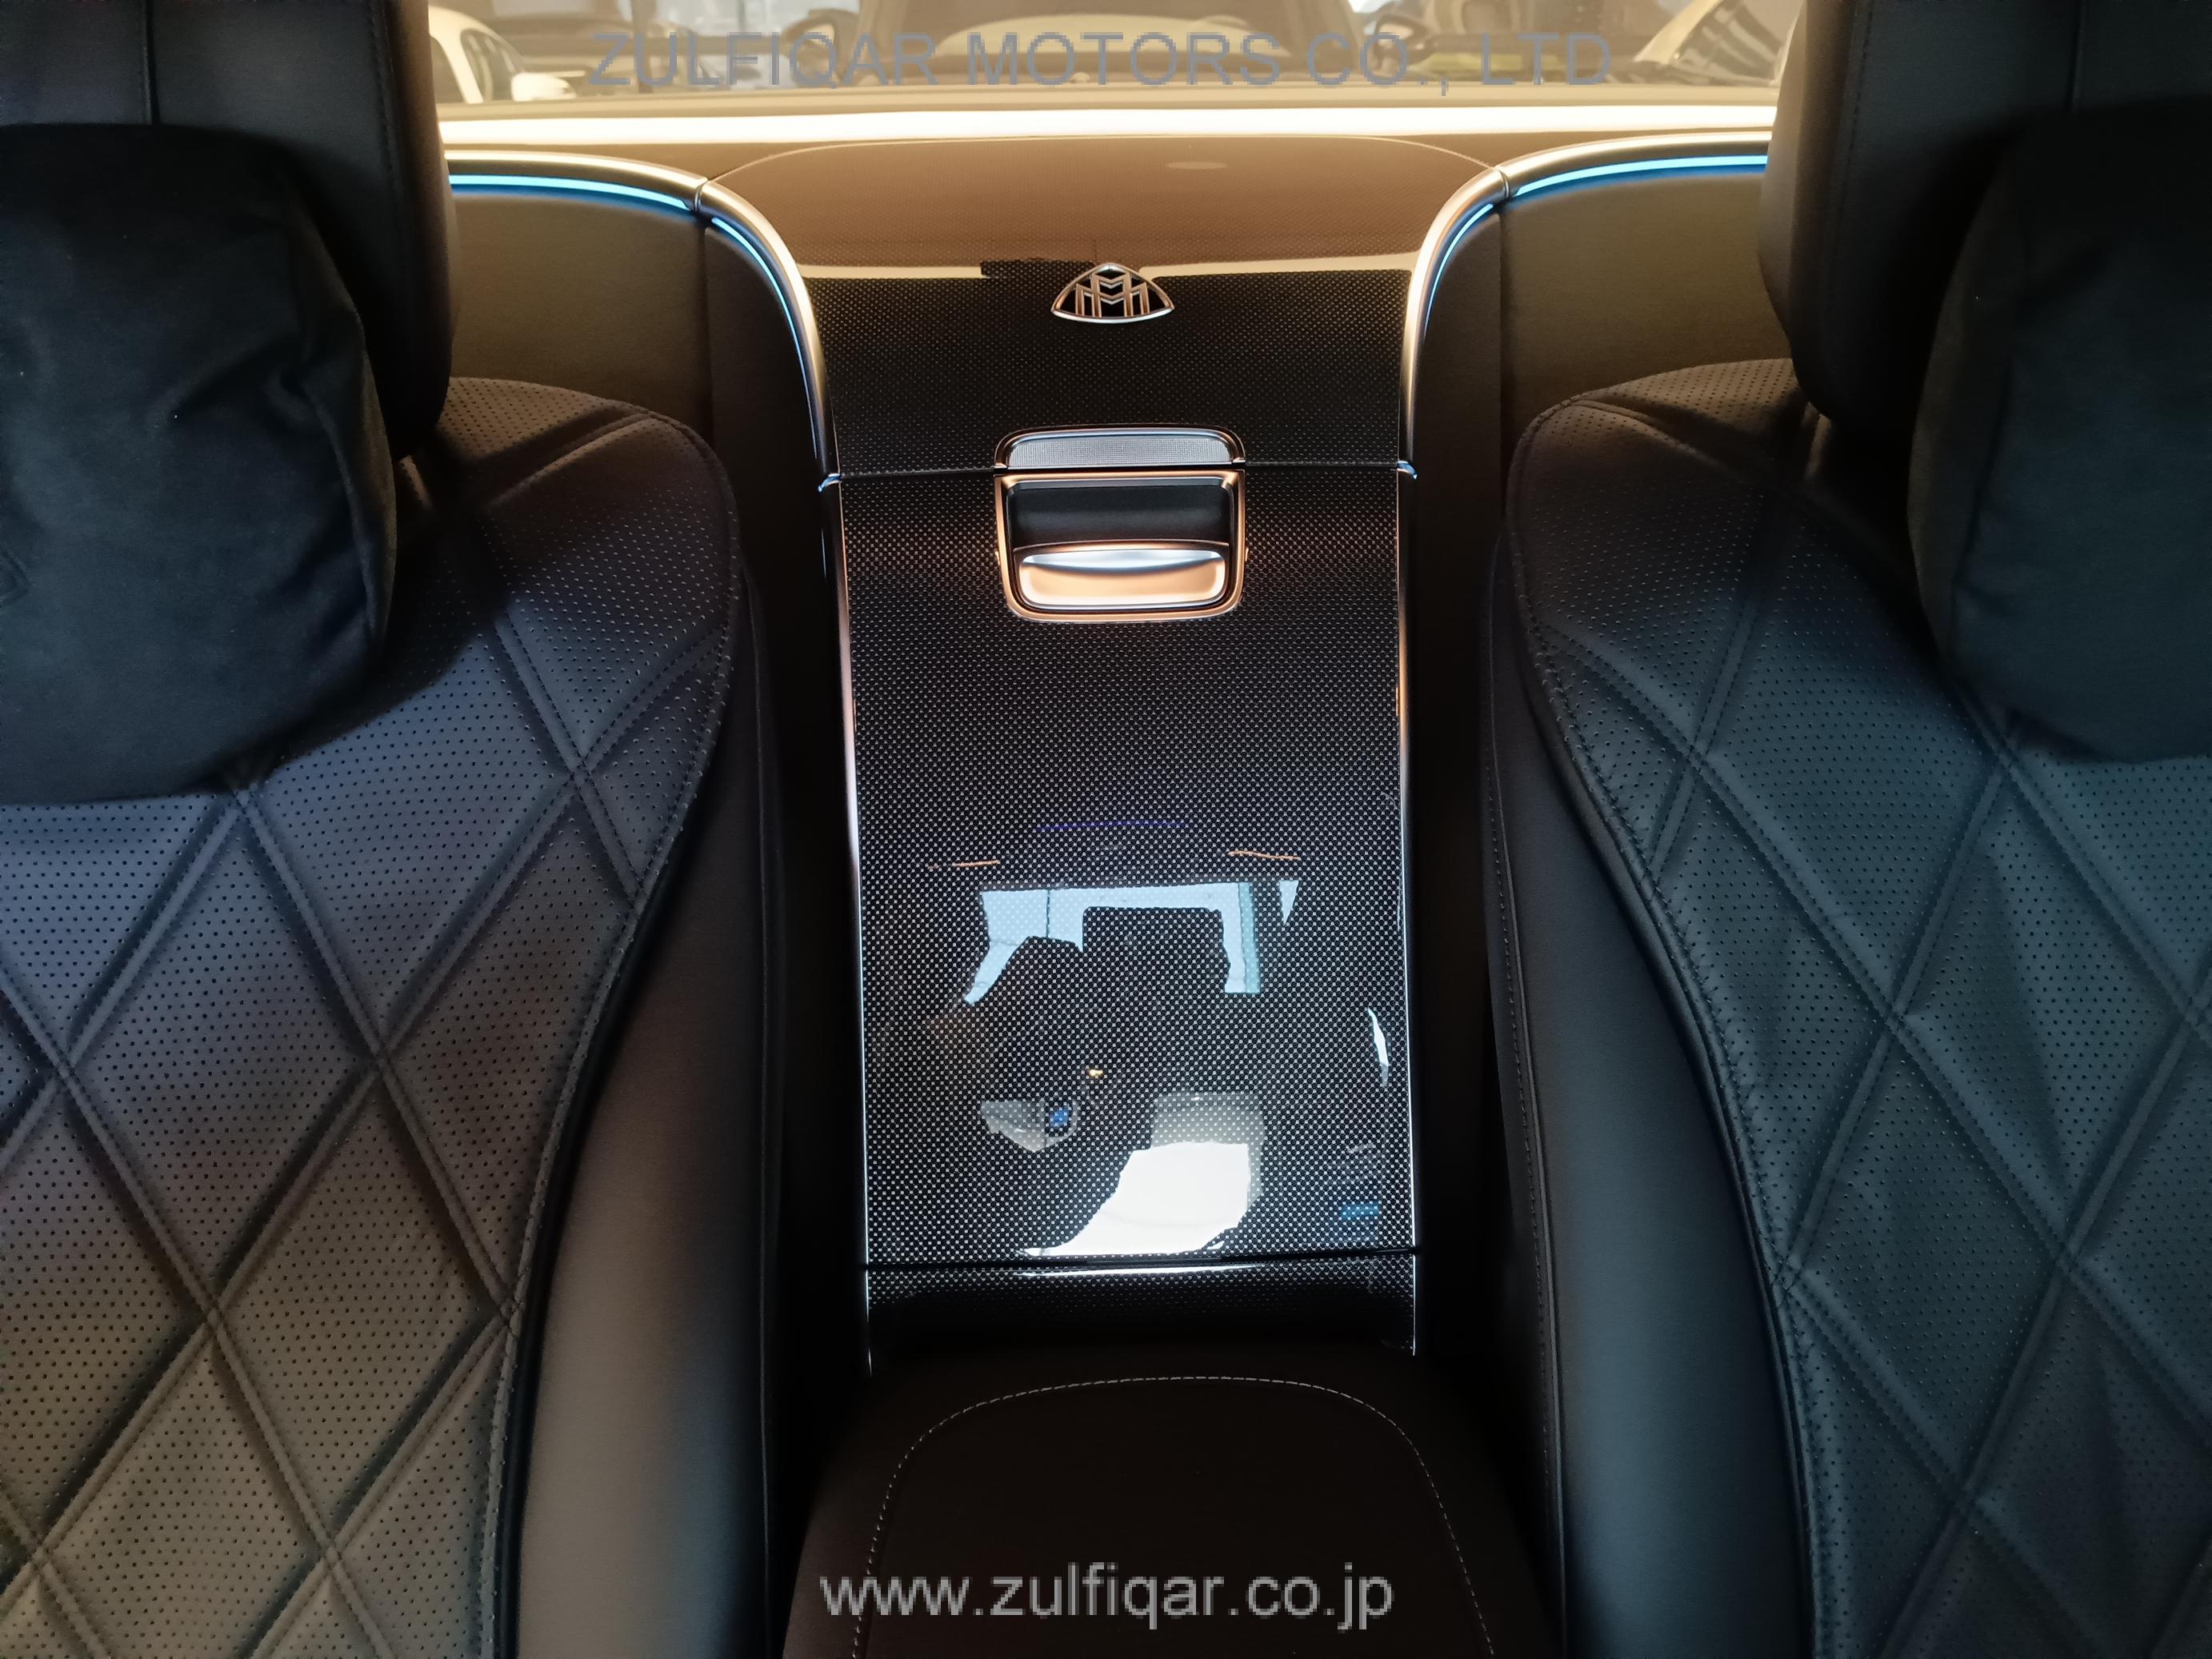 MERCEDES MAYBACH S CLASS 2022 Image 74